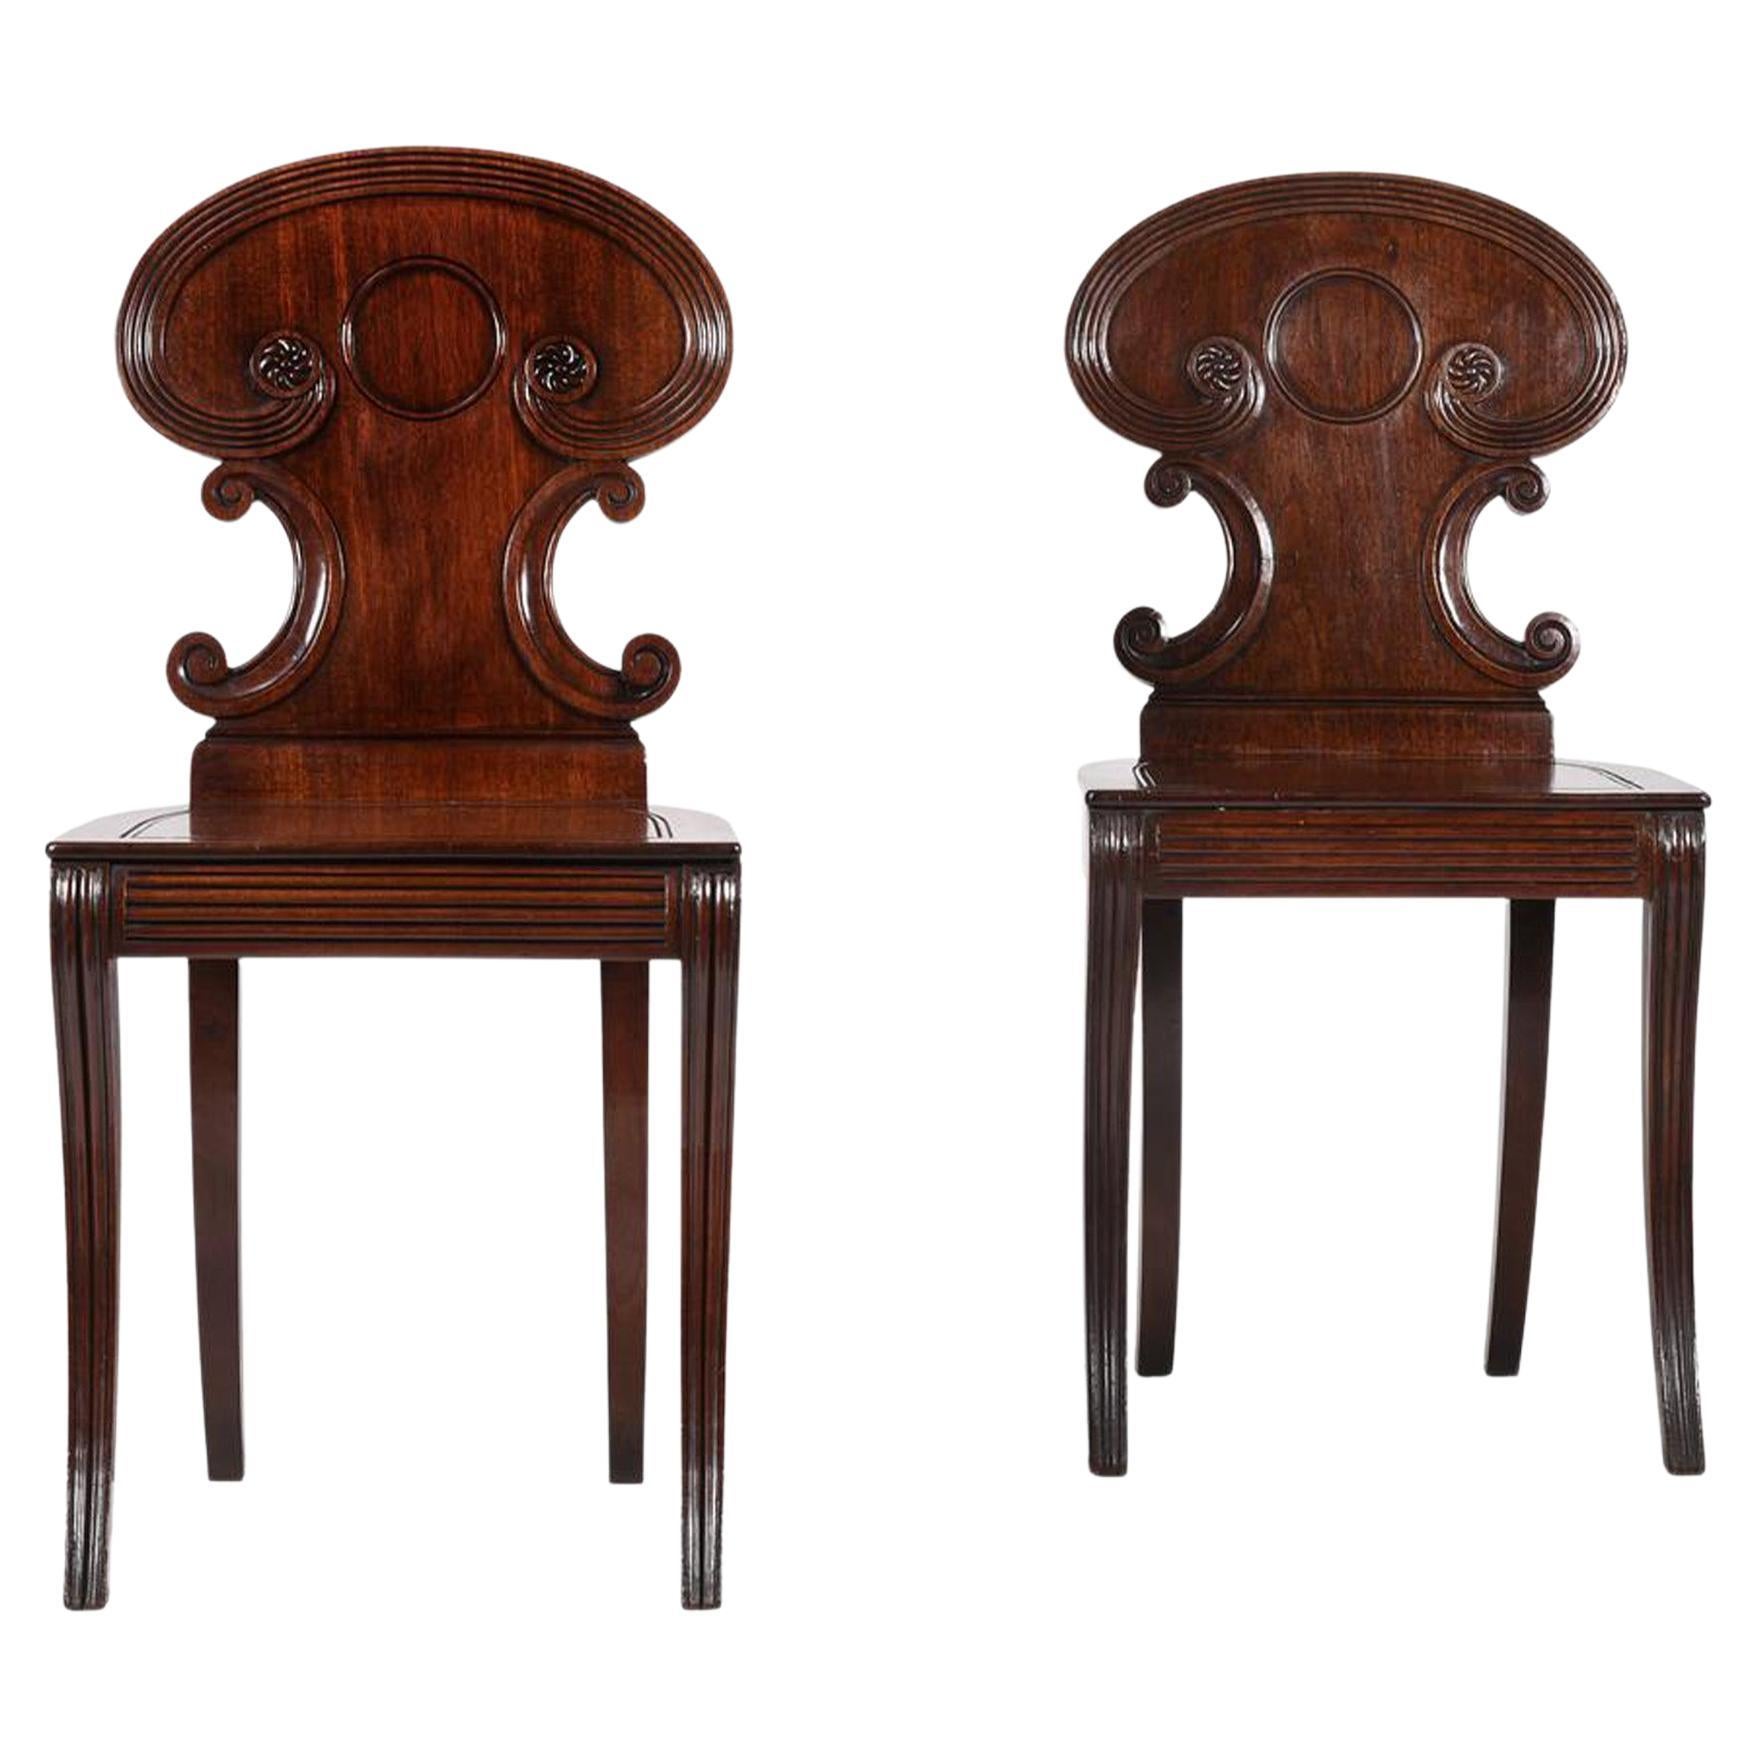 Pair of Regency Mahogany Hall Chairs by Gillows of Lancaster